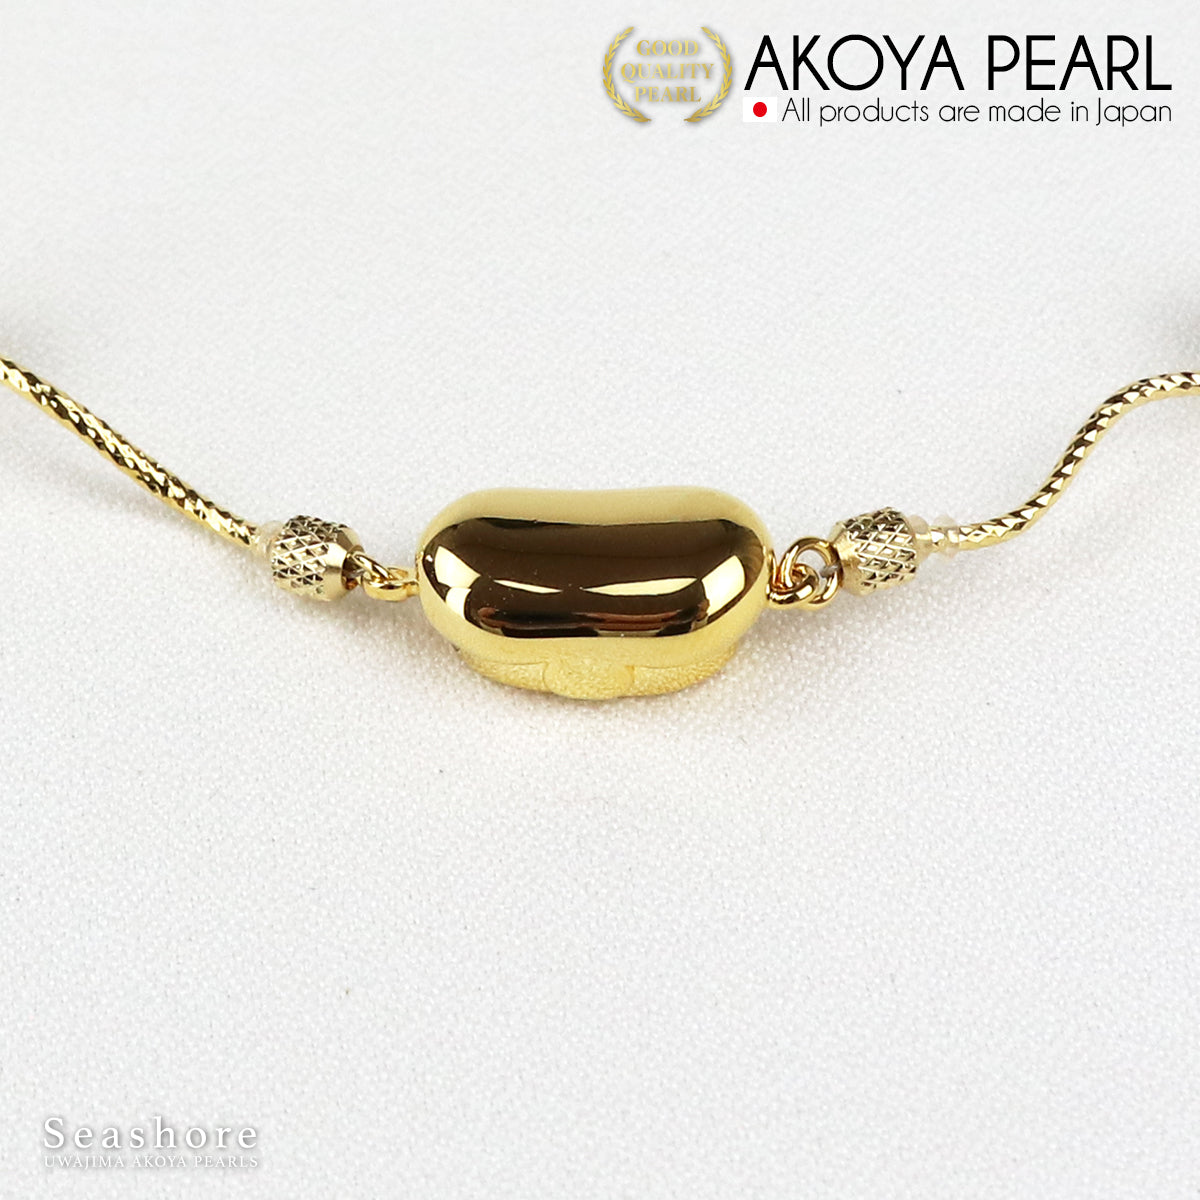 Akoya Pearl Station Pearl Necklace [8.5-9.0mm] 12 Beads SV925 Rhodium/Gold Princess Model with Cardboard Case